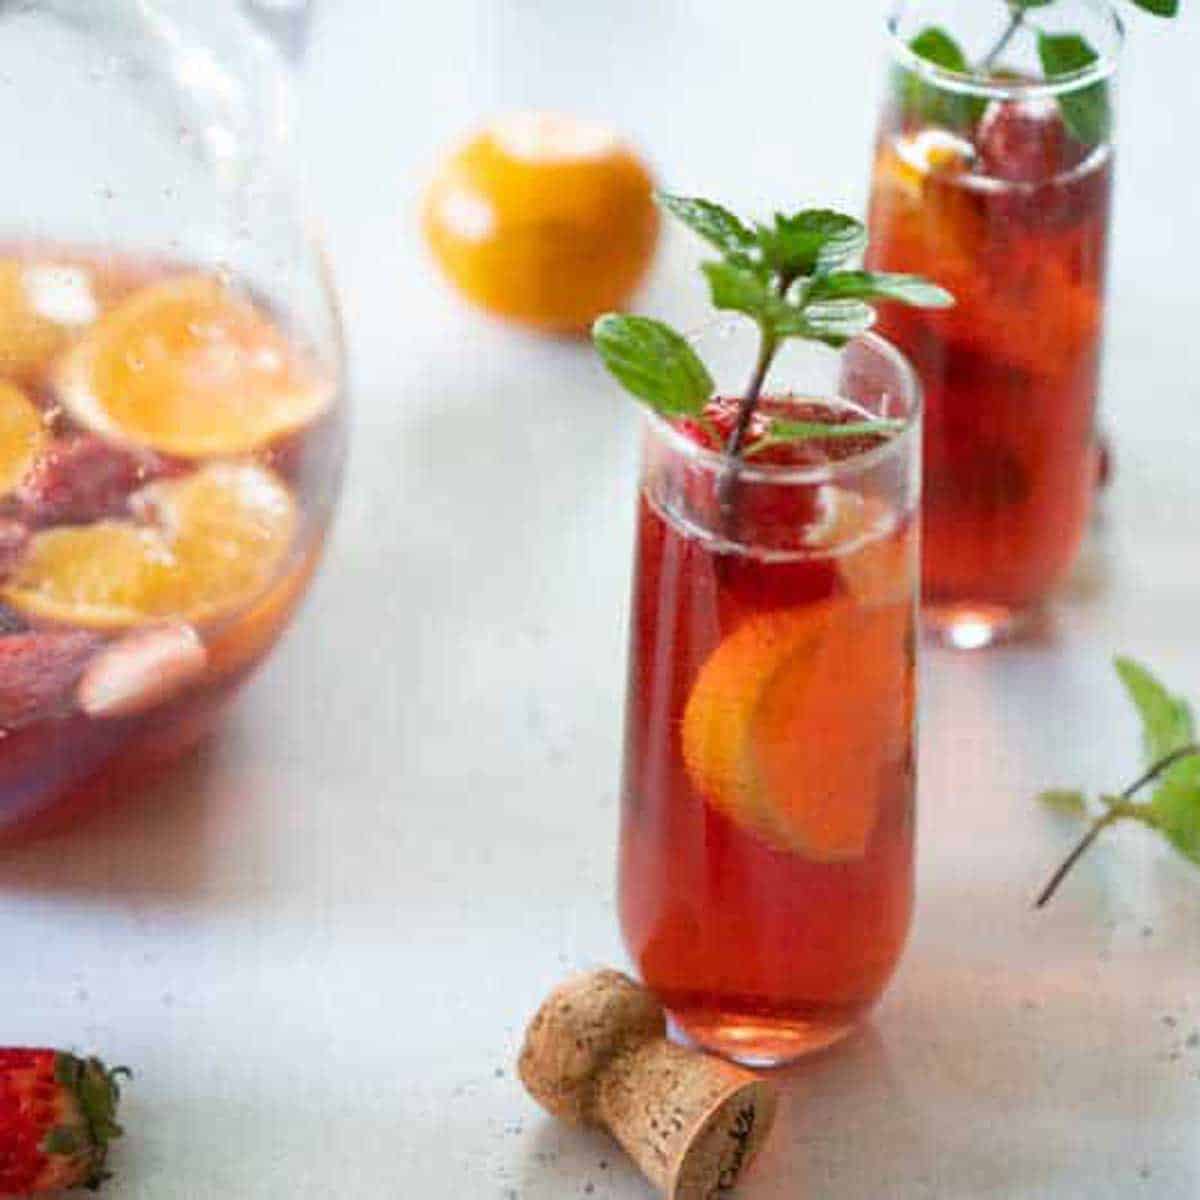 https://thehappierhomemaker.com/wp-content/uploads/2019/12/easy-champagne-punch-featured.jpg